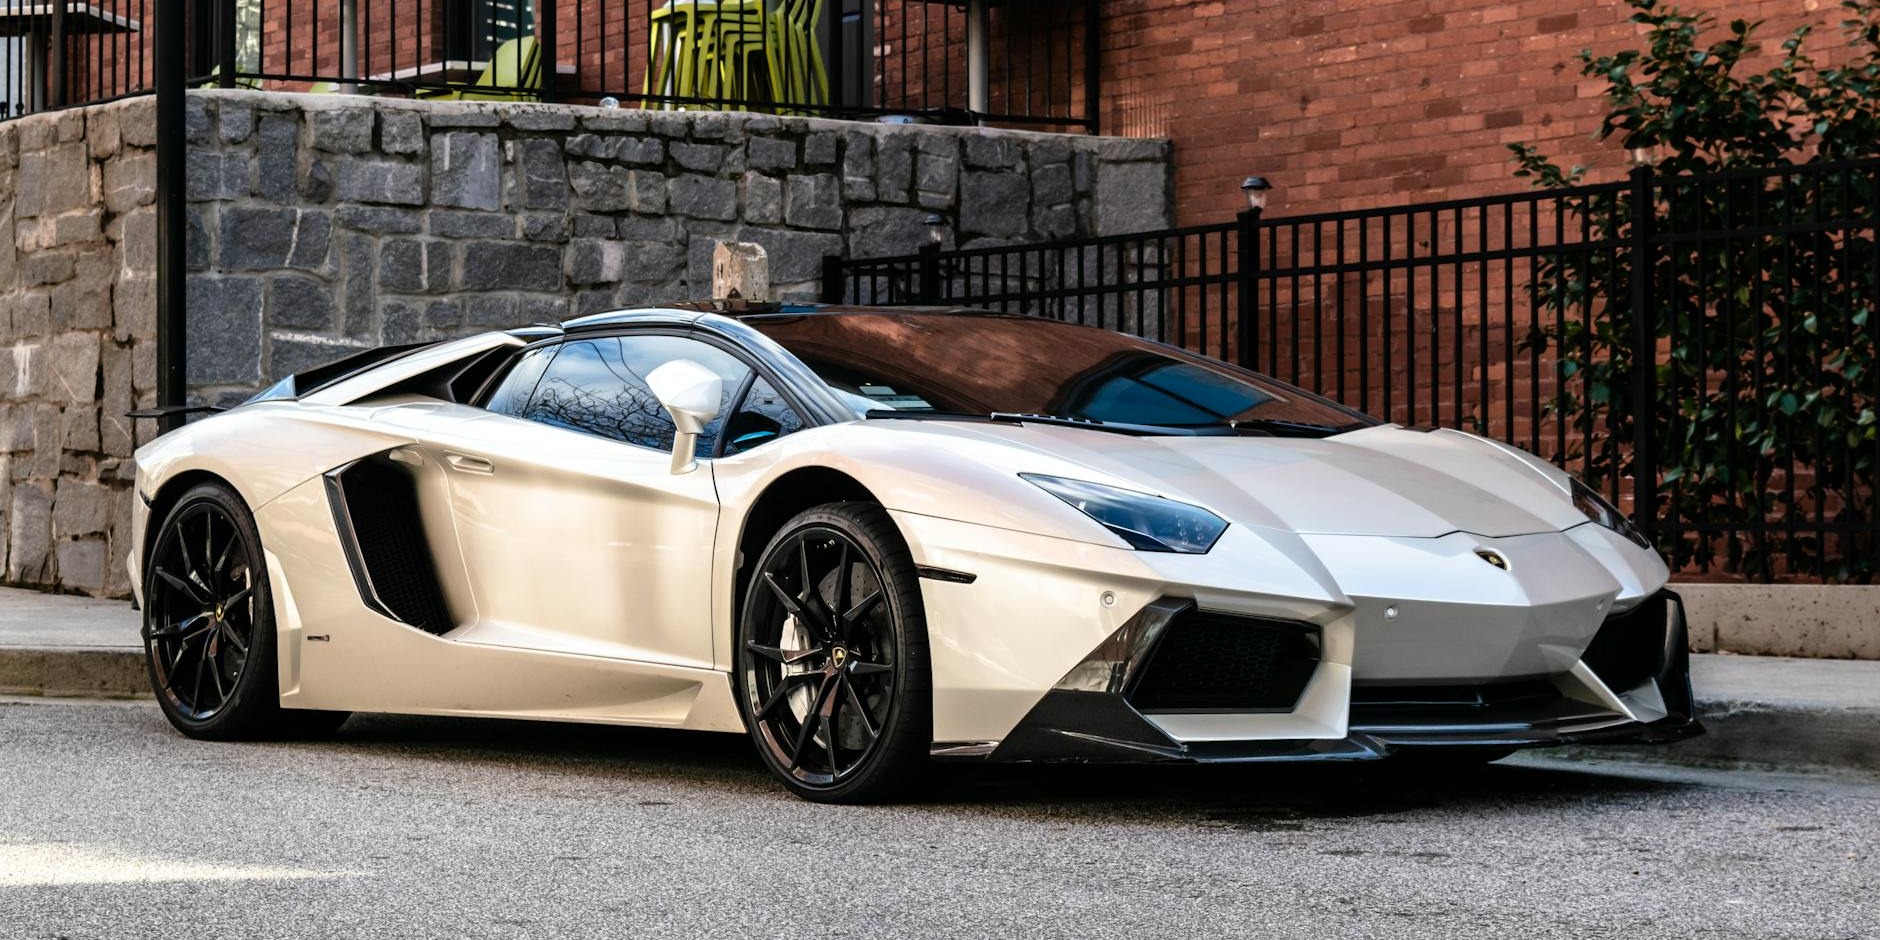 What You Need to Know Before Hiring a Supercar in London